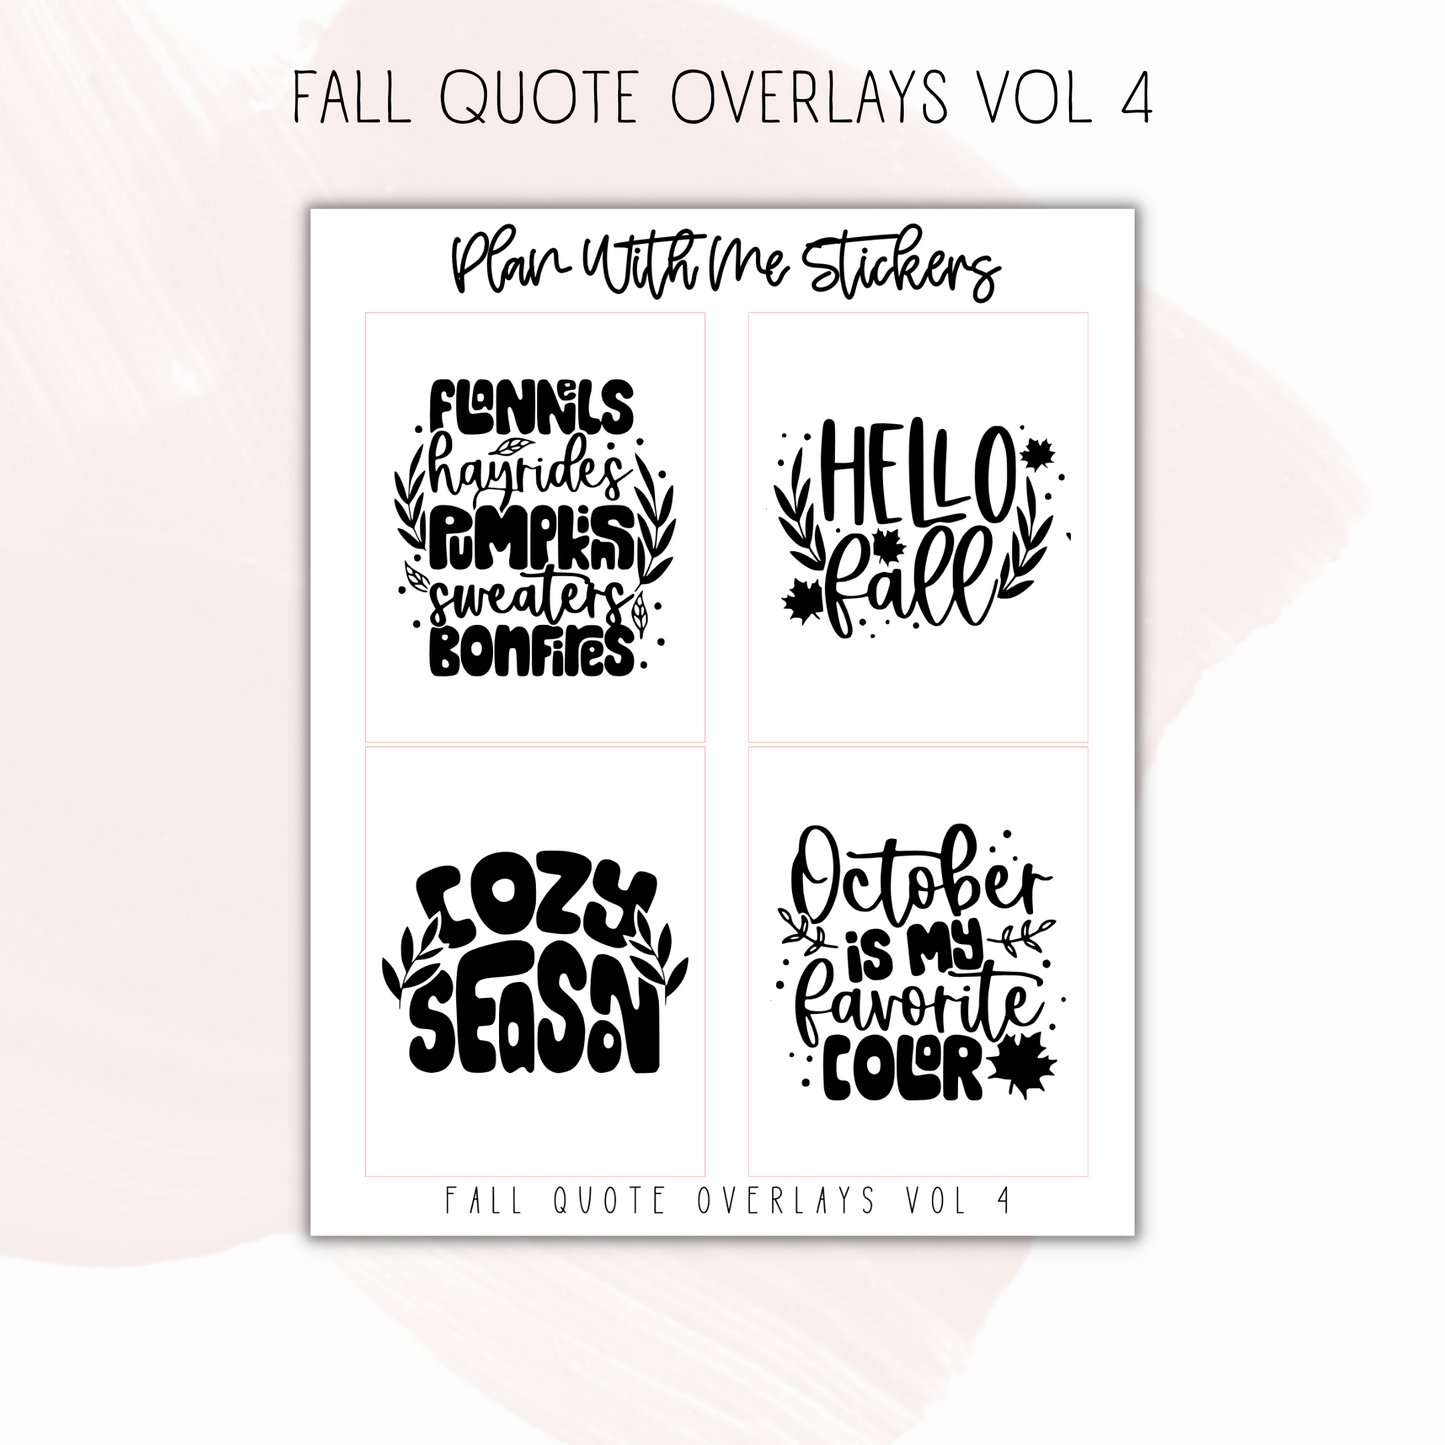 Fall Quote Overlays Vol 4